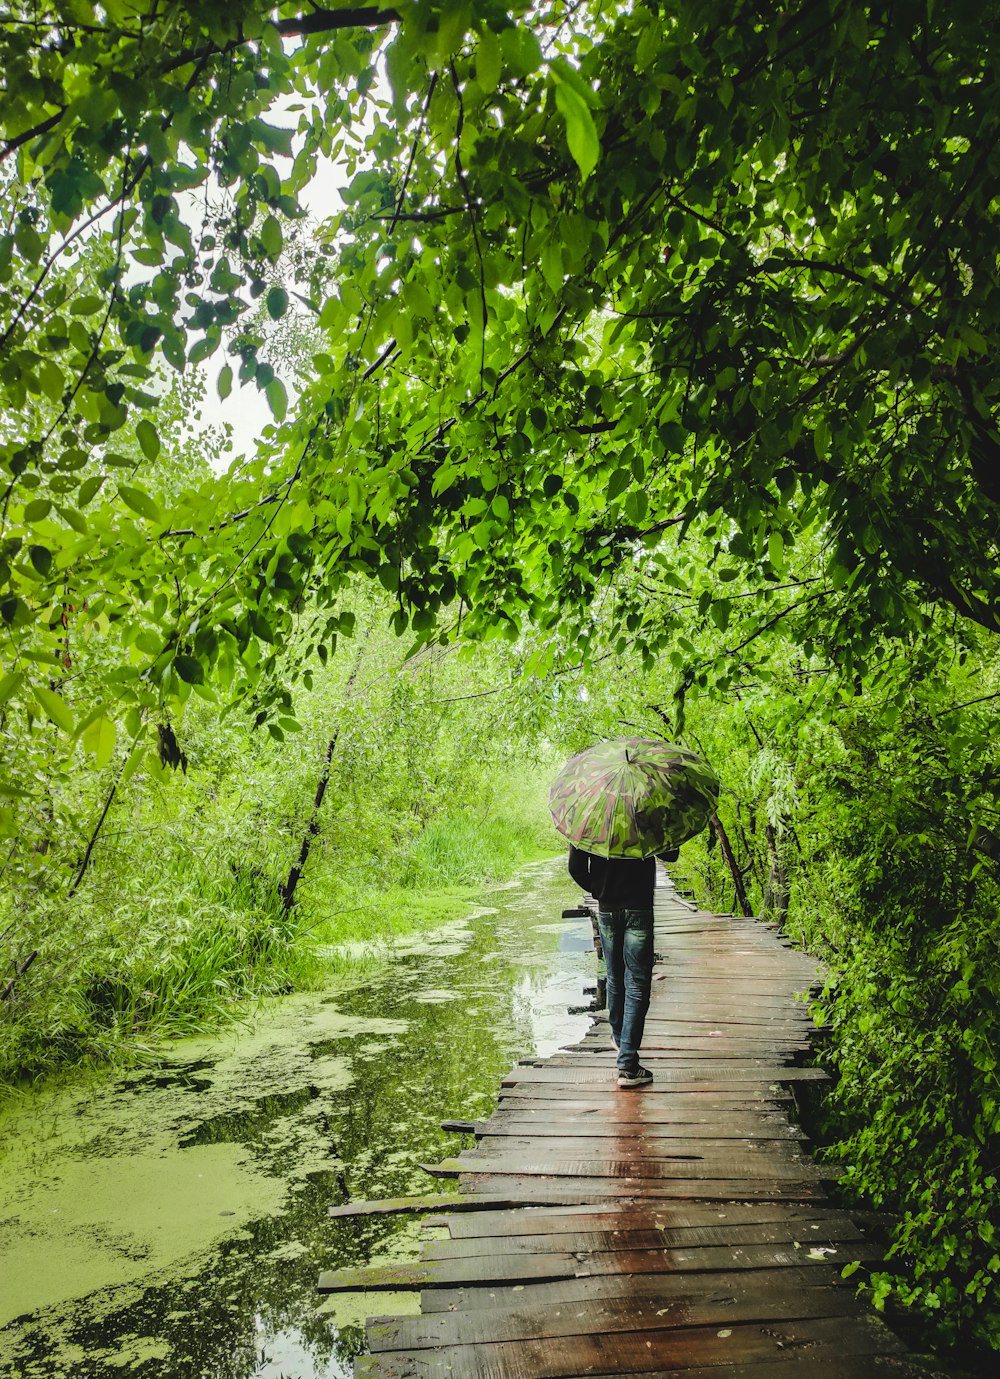 a person with an umbrella walking on a wooden bridge